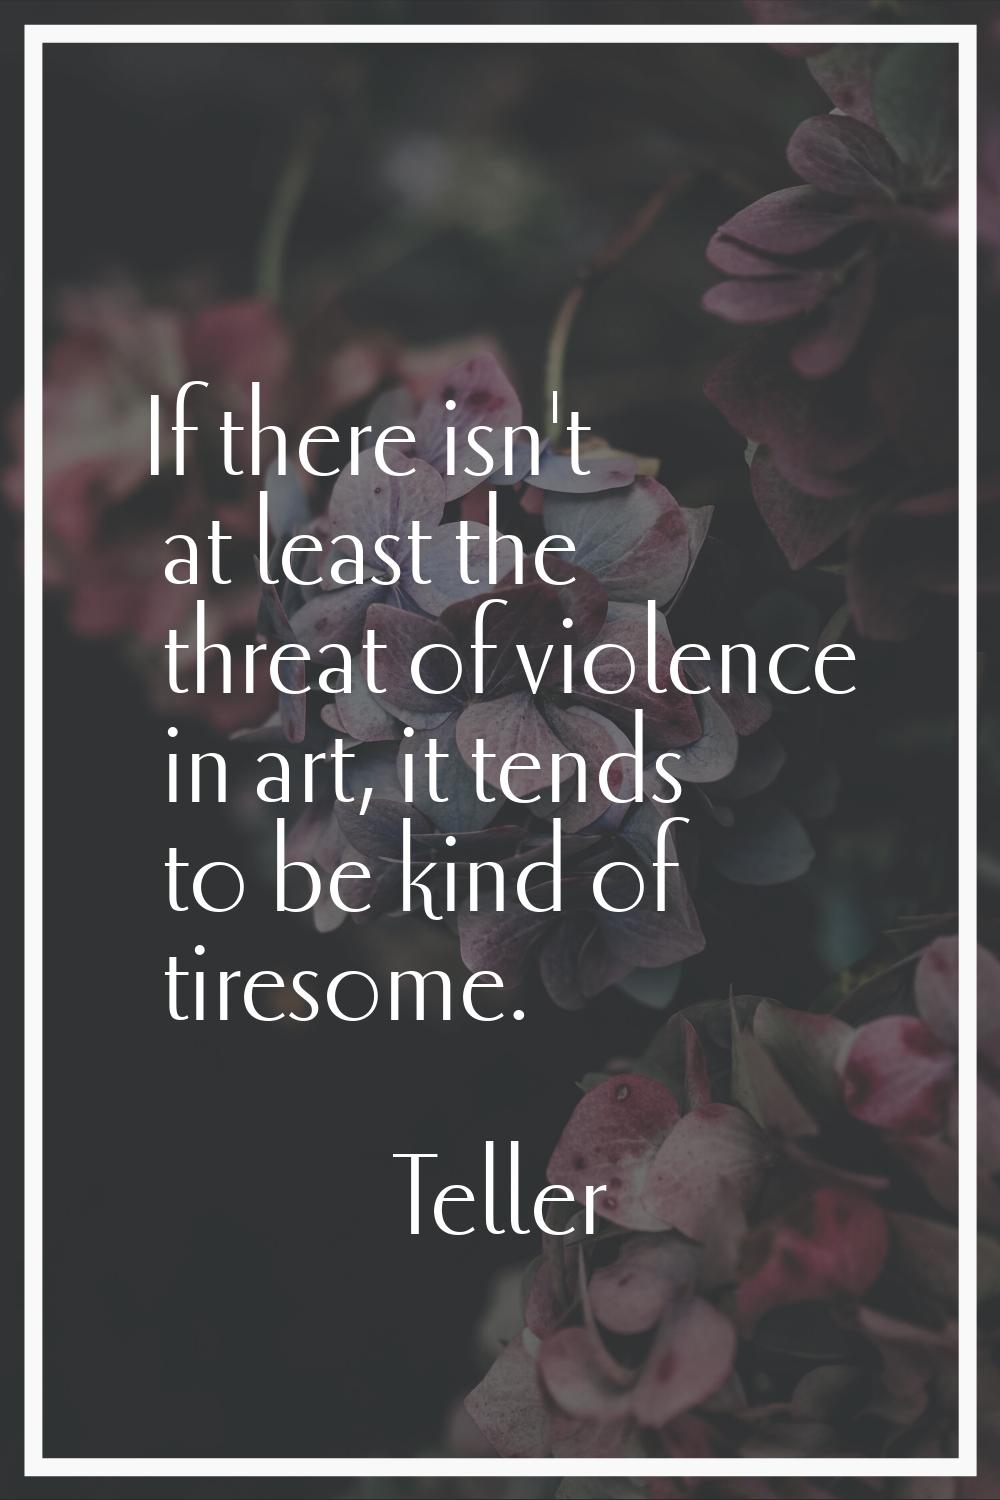 If there isn't at least the threat of violence in art, it tends to be kind of tiresome.